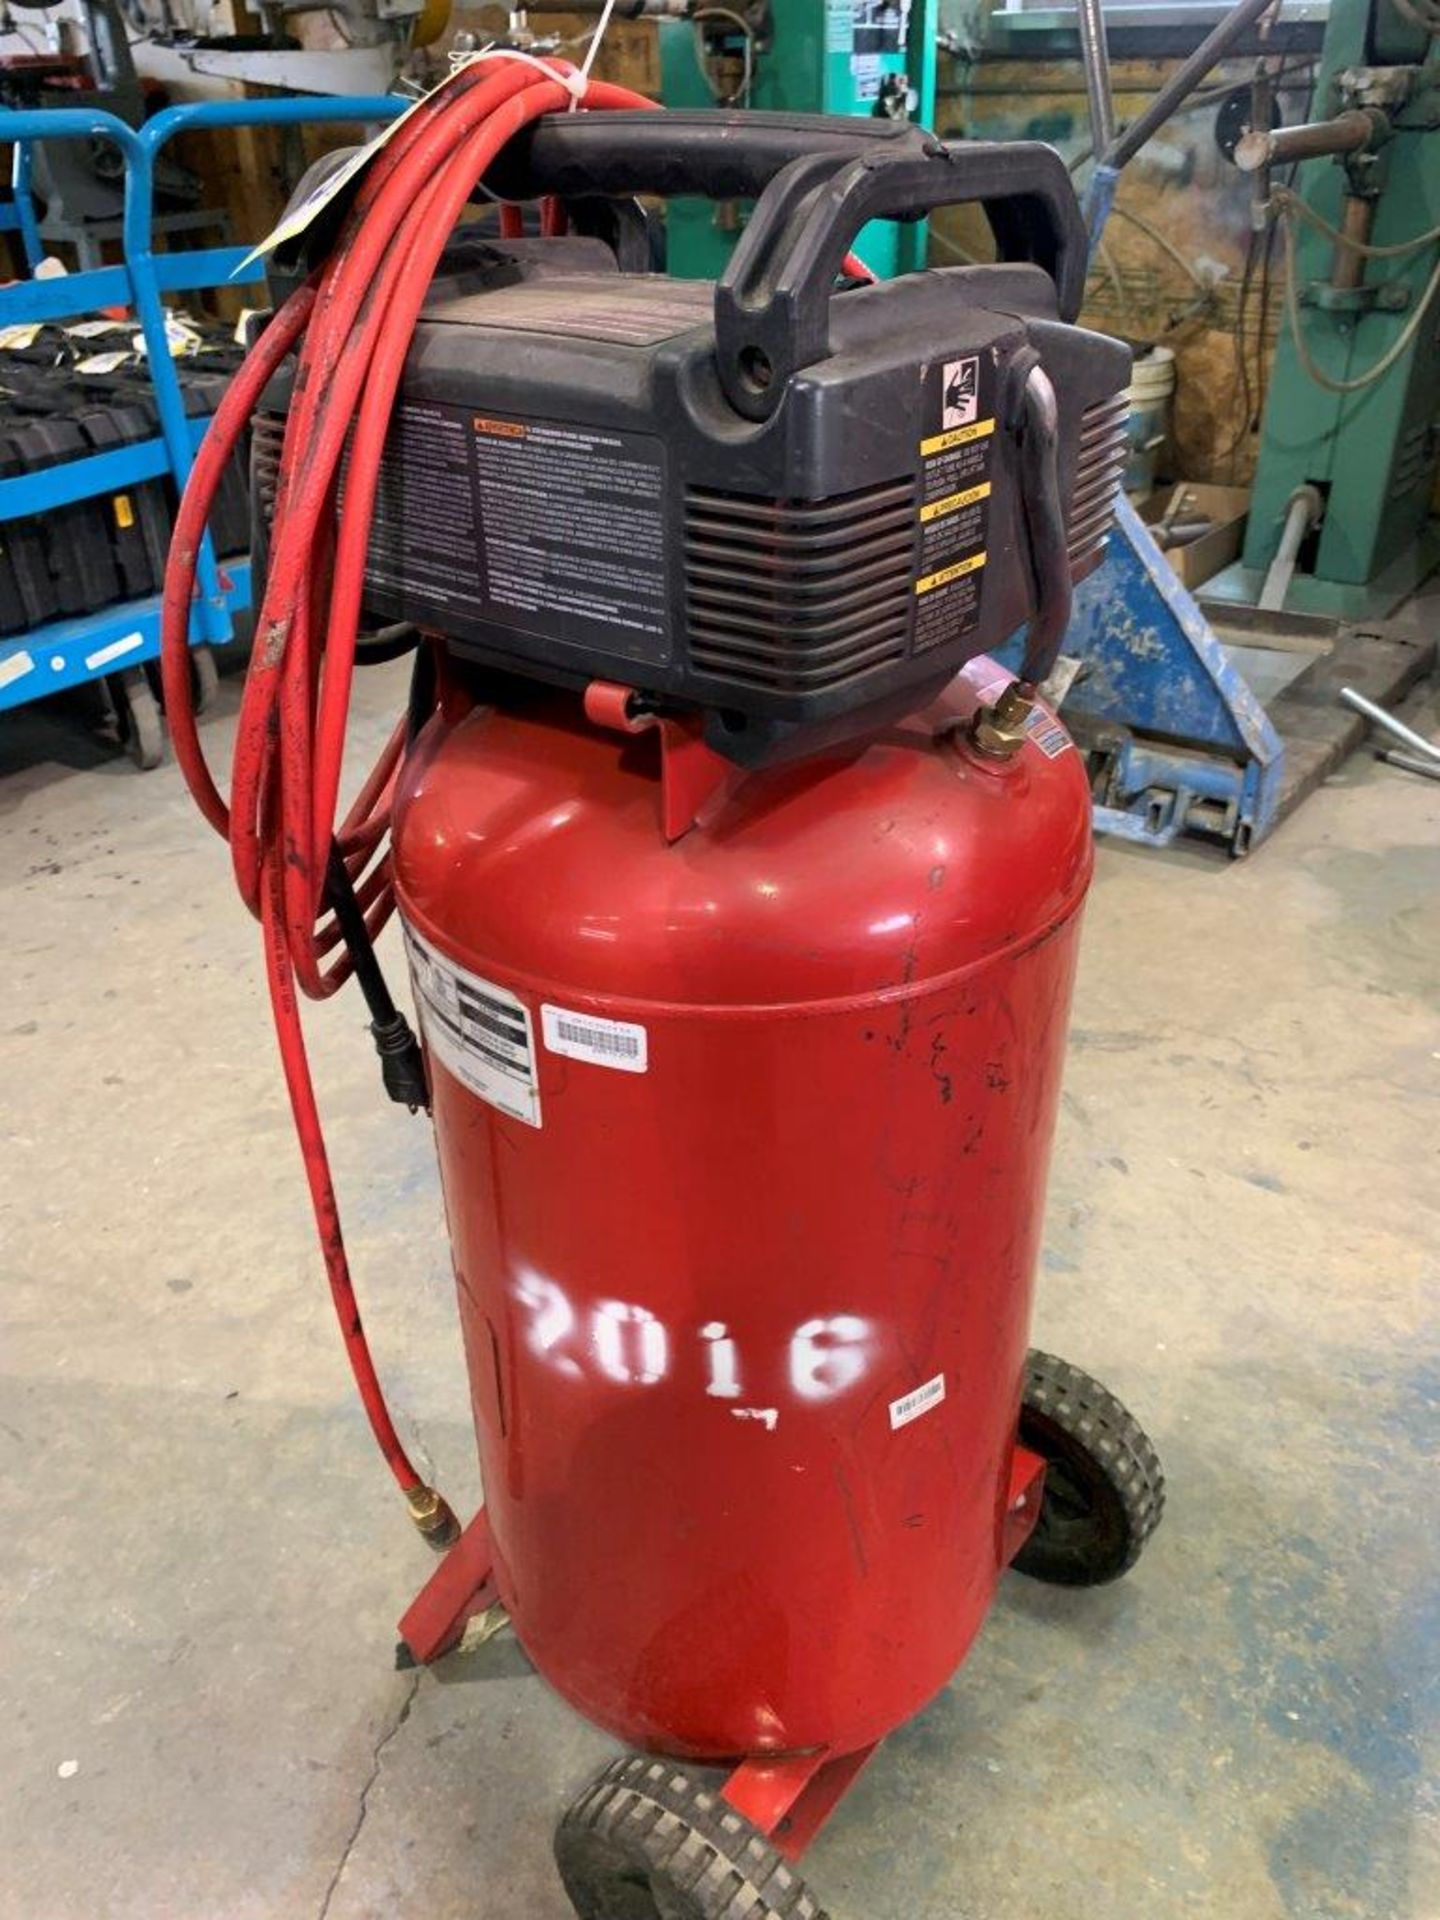 PORTER CABLE 150 PSI 17 GAL. PORTABLE AIR COMPRESSOR W/ WHEEL KIT - Image 3 of 5